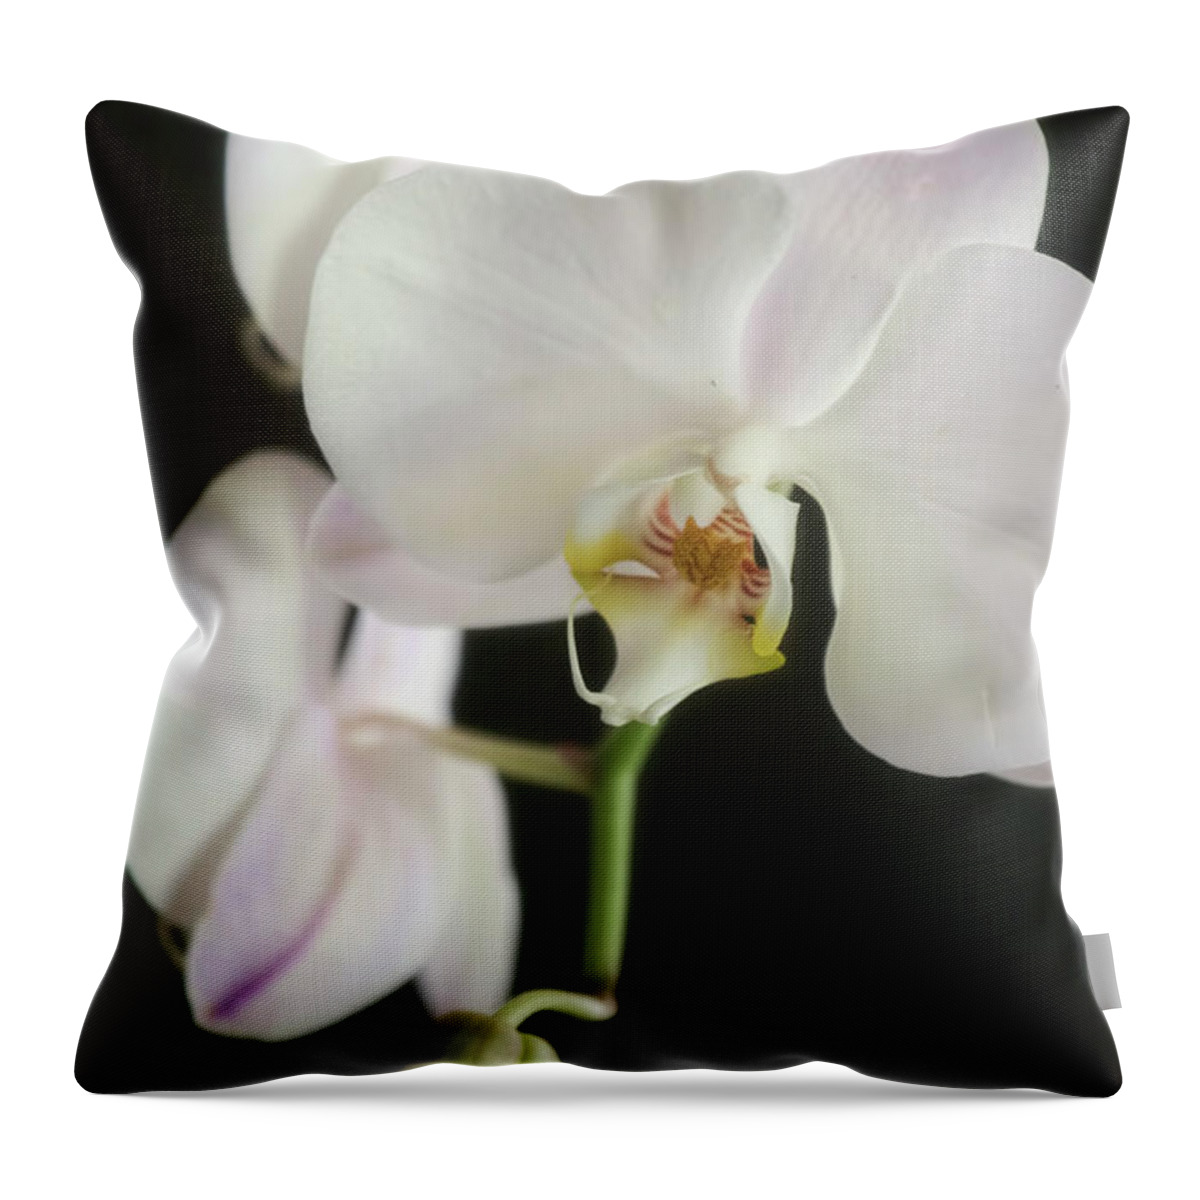 Orchids Throw Pillow featuring the photograph One On The Way by Joan Bertucci